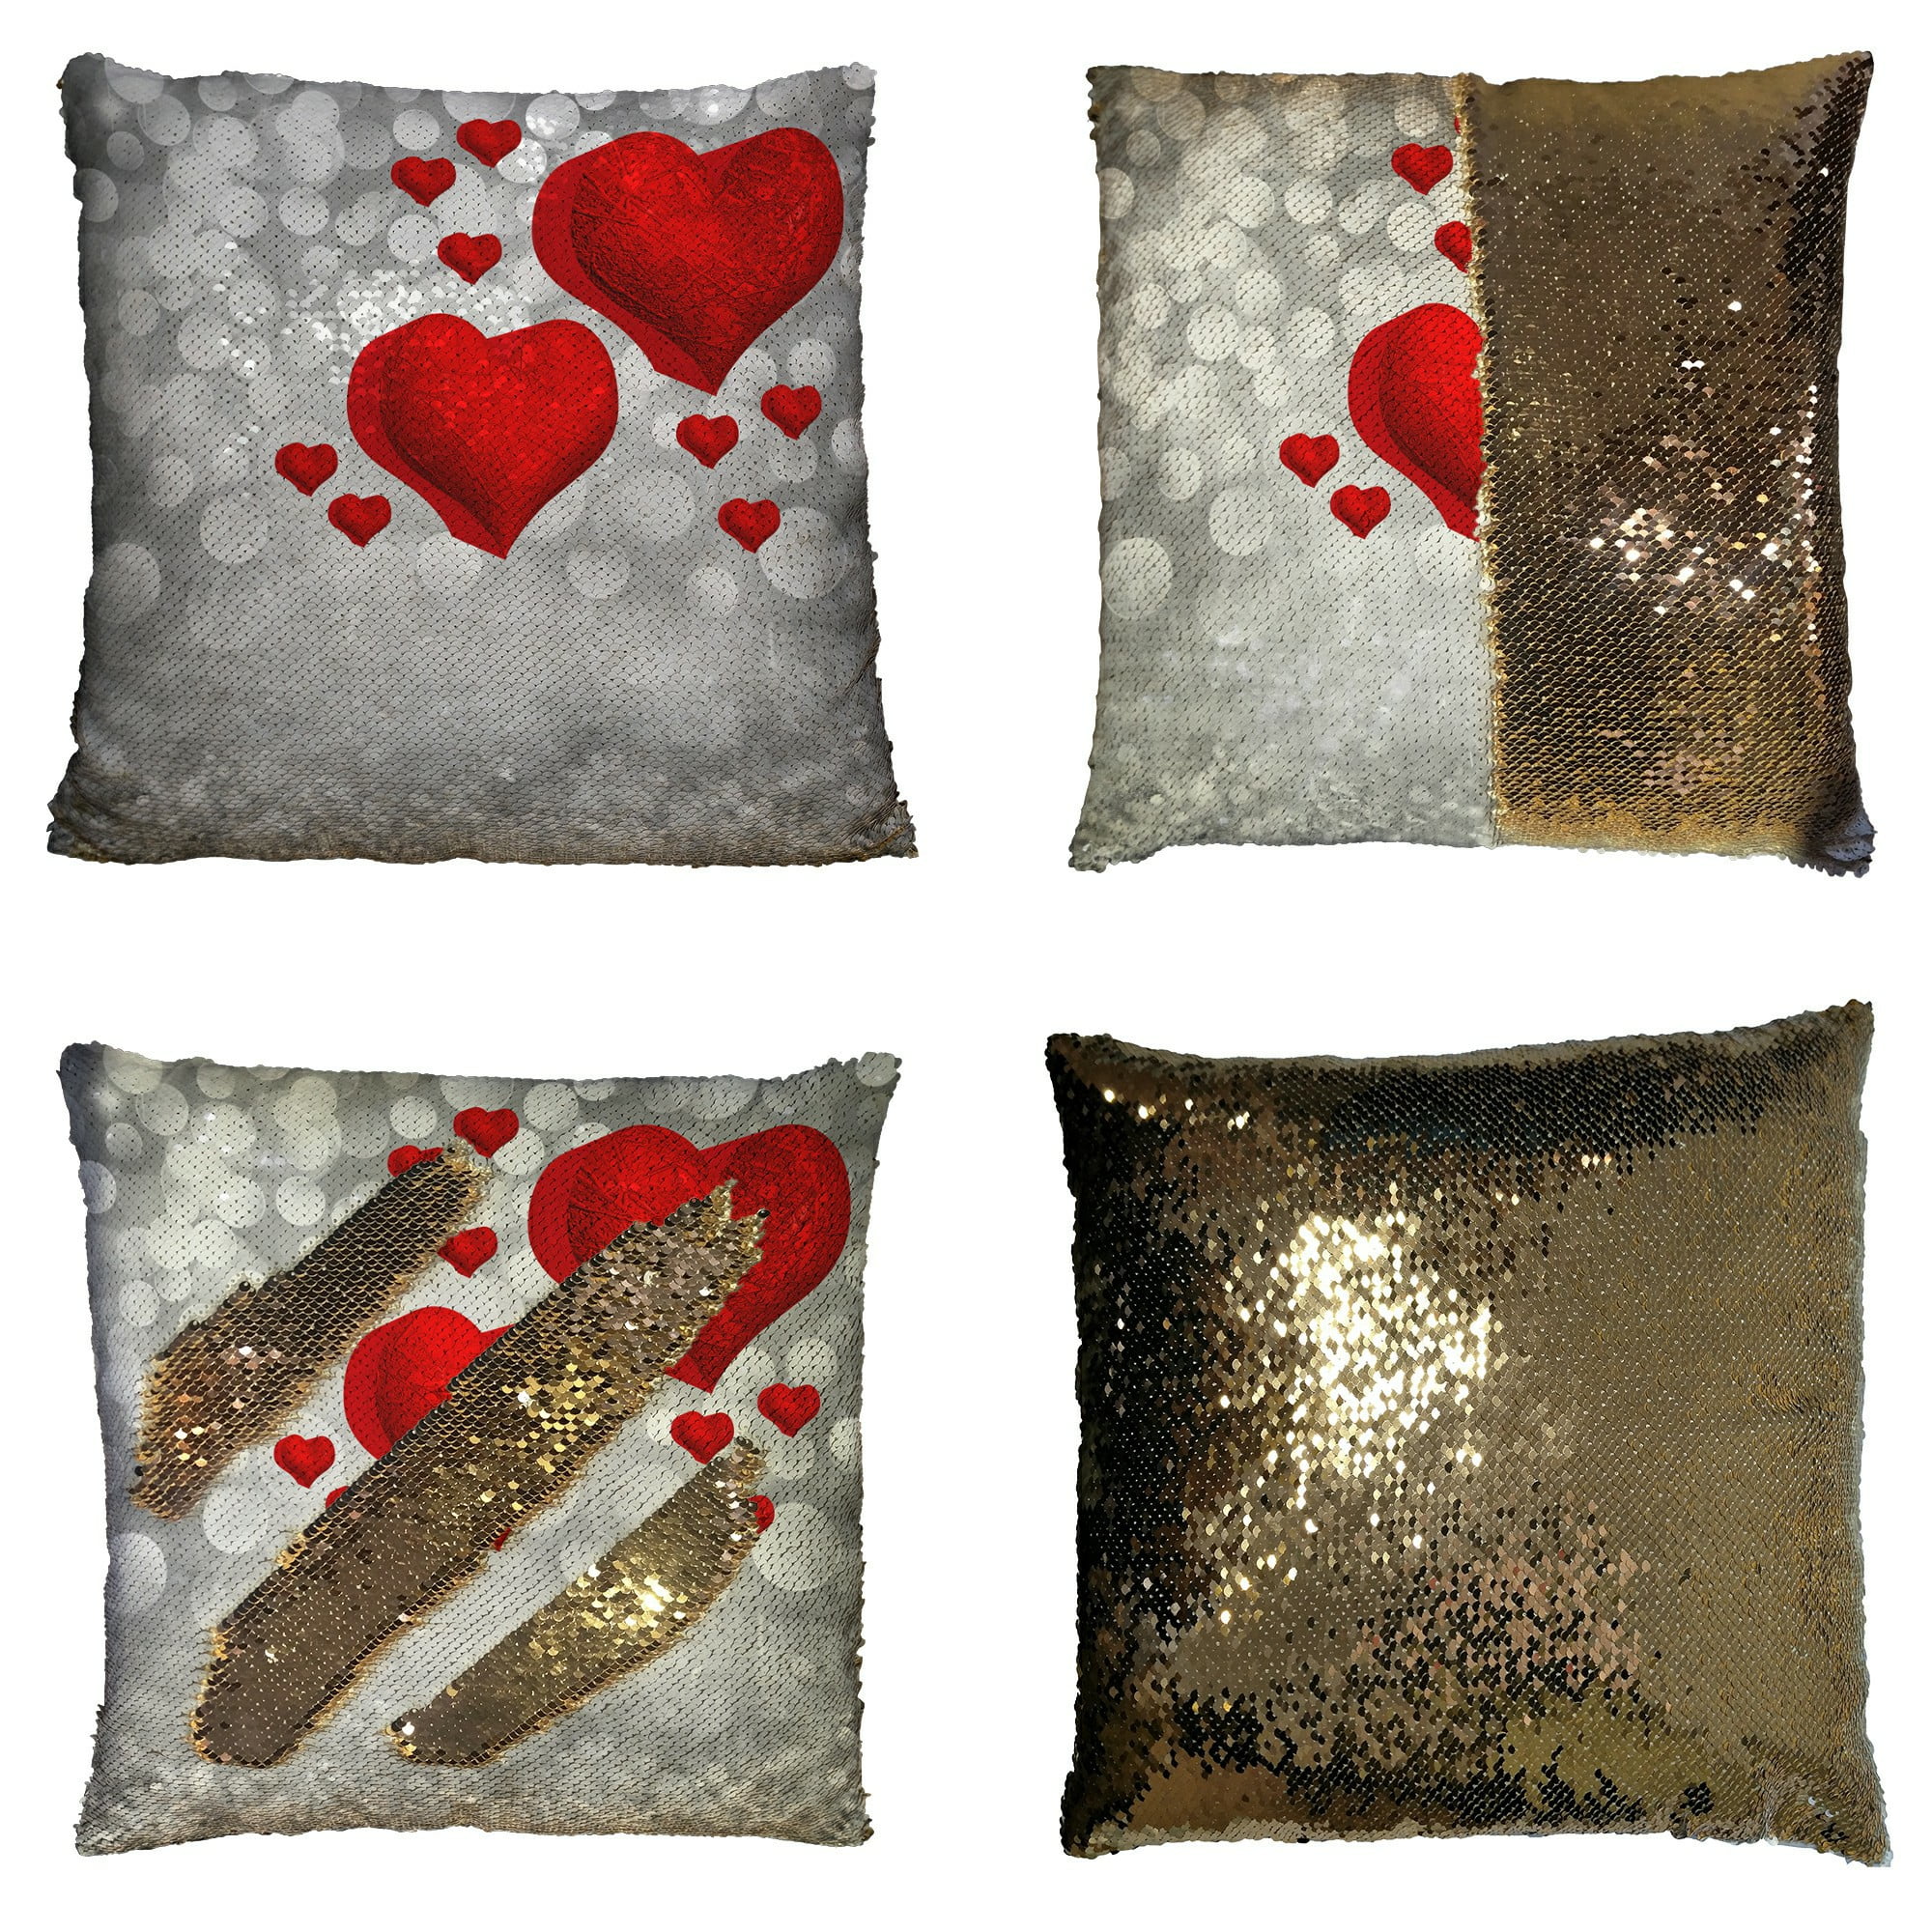 Pillow Insert is Not Included Select from Glitter or a Hand-Crystaled Design Ships from US Pillow Cover with Snowman Design